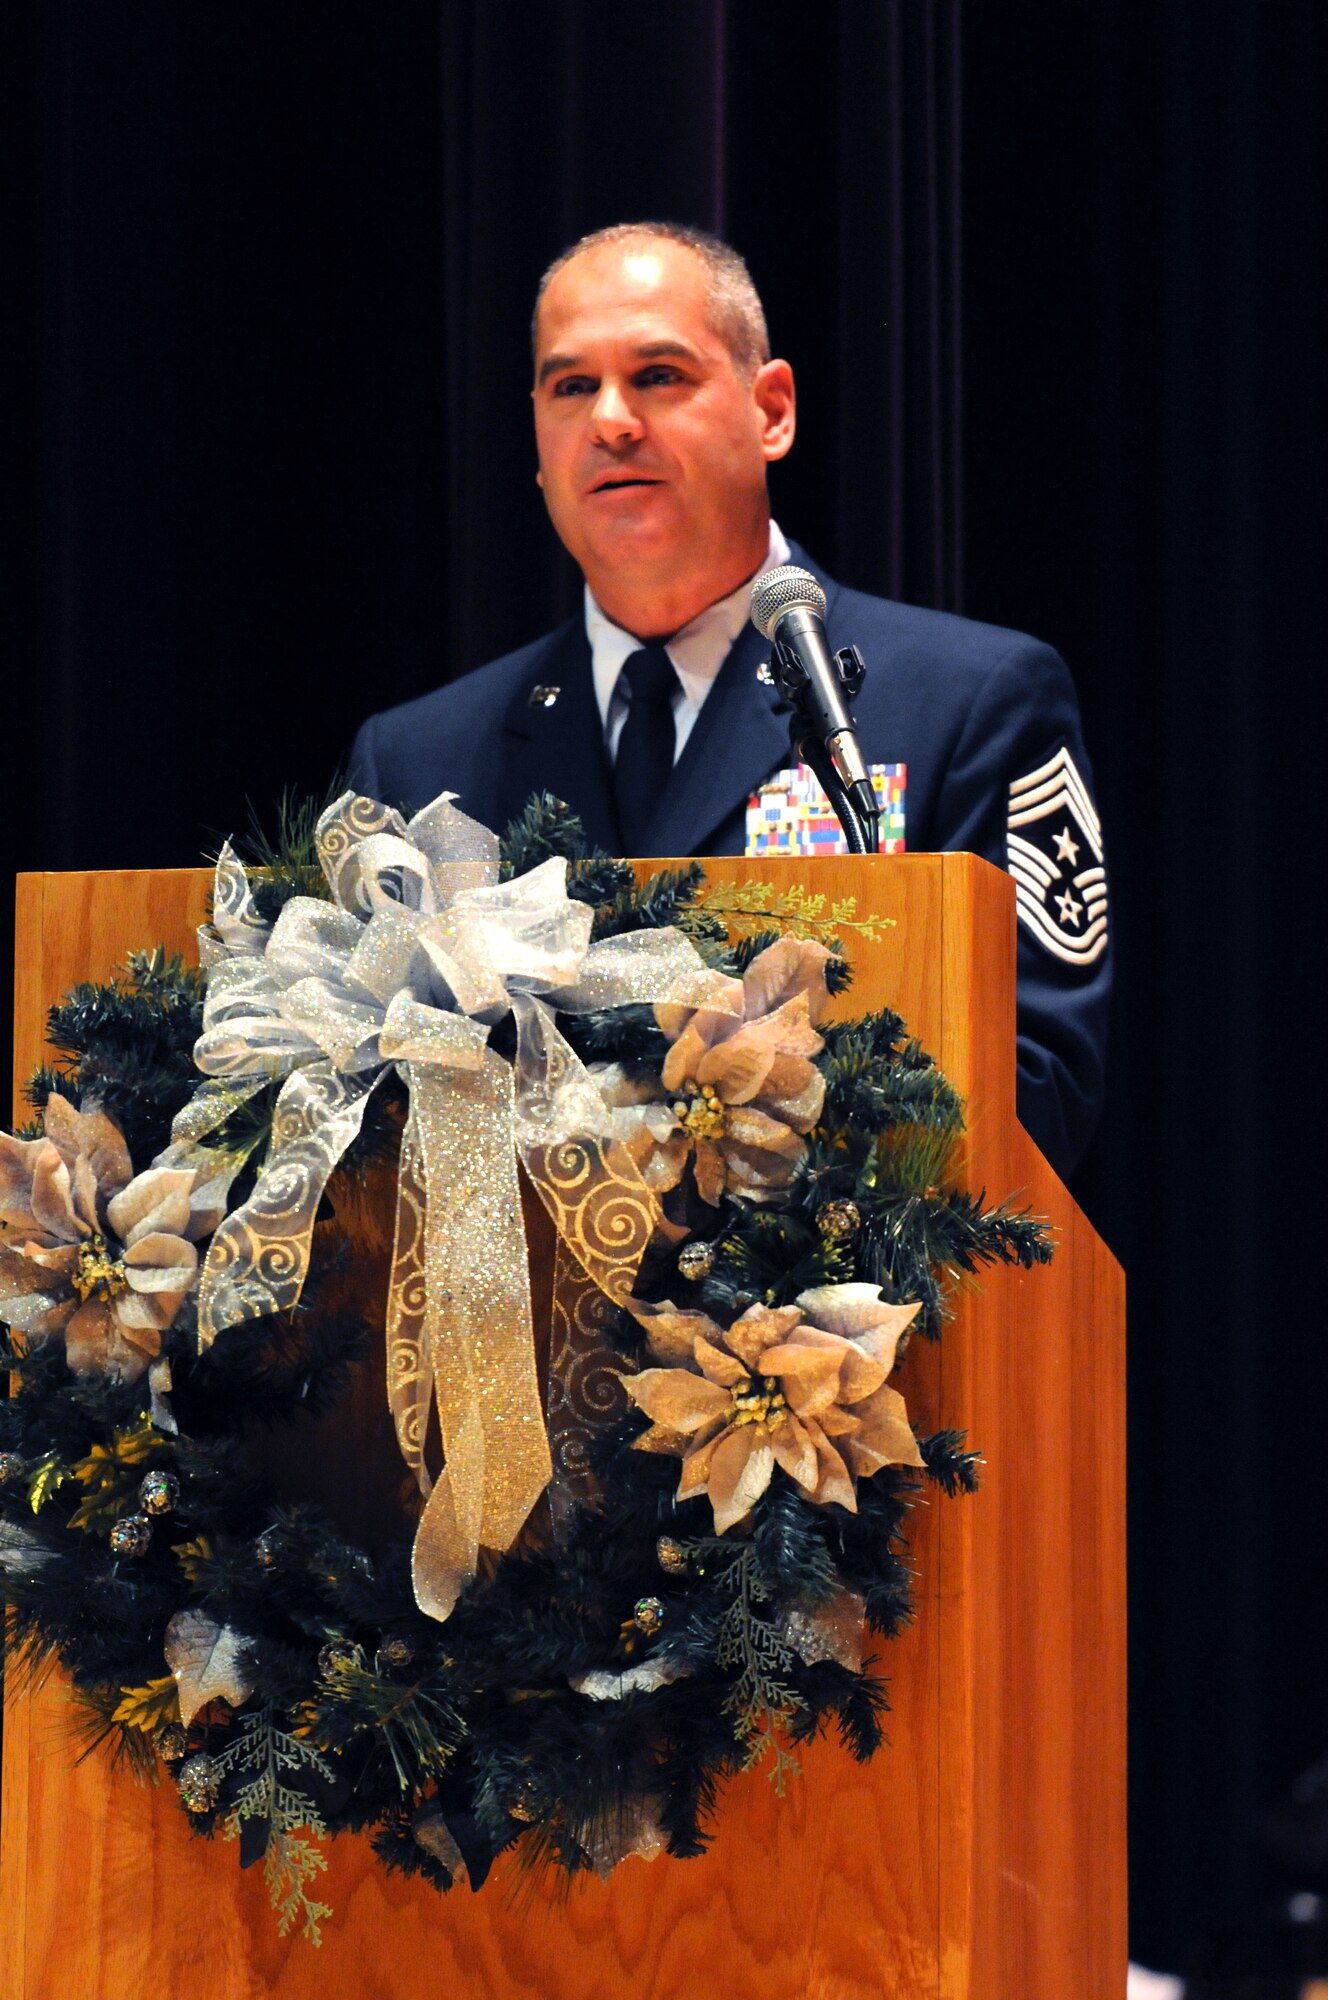 148th Fighter Wing Command Chief Master Sgt. Mark Rukavina addresses the 148th Fighter Wing for the first time as command chief during the Transfer of Authority ceremony December 4, 2012 at the Duluth Entertainment Convention Center.  (National Guard photo by Tech. Sgt. Brett Ewald.)